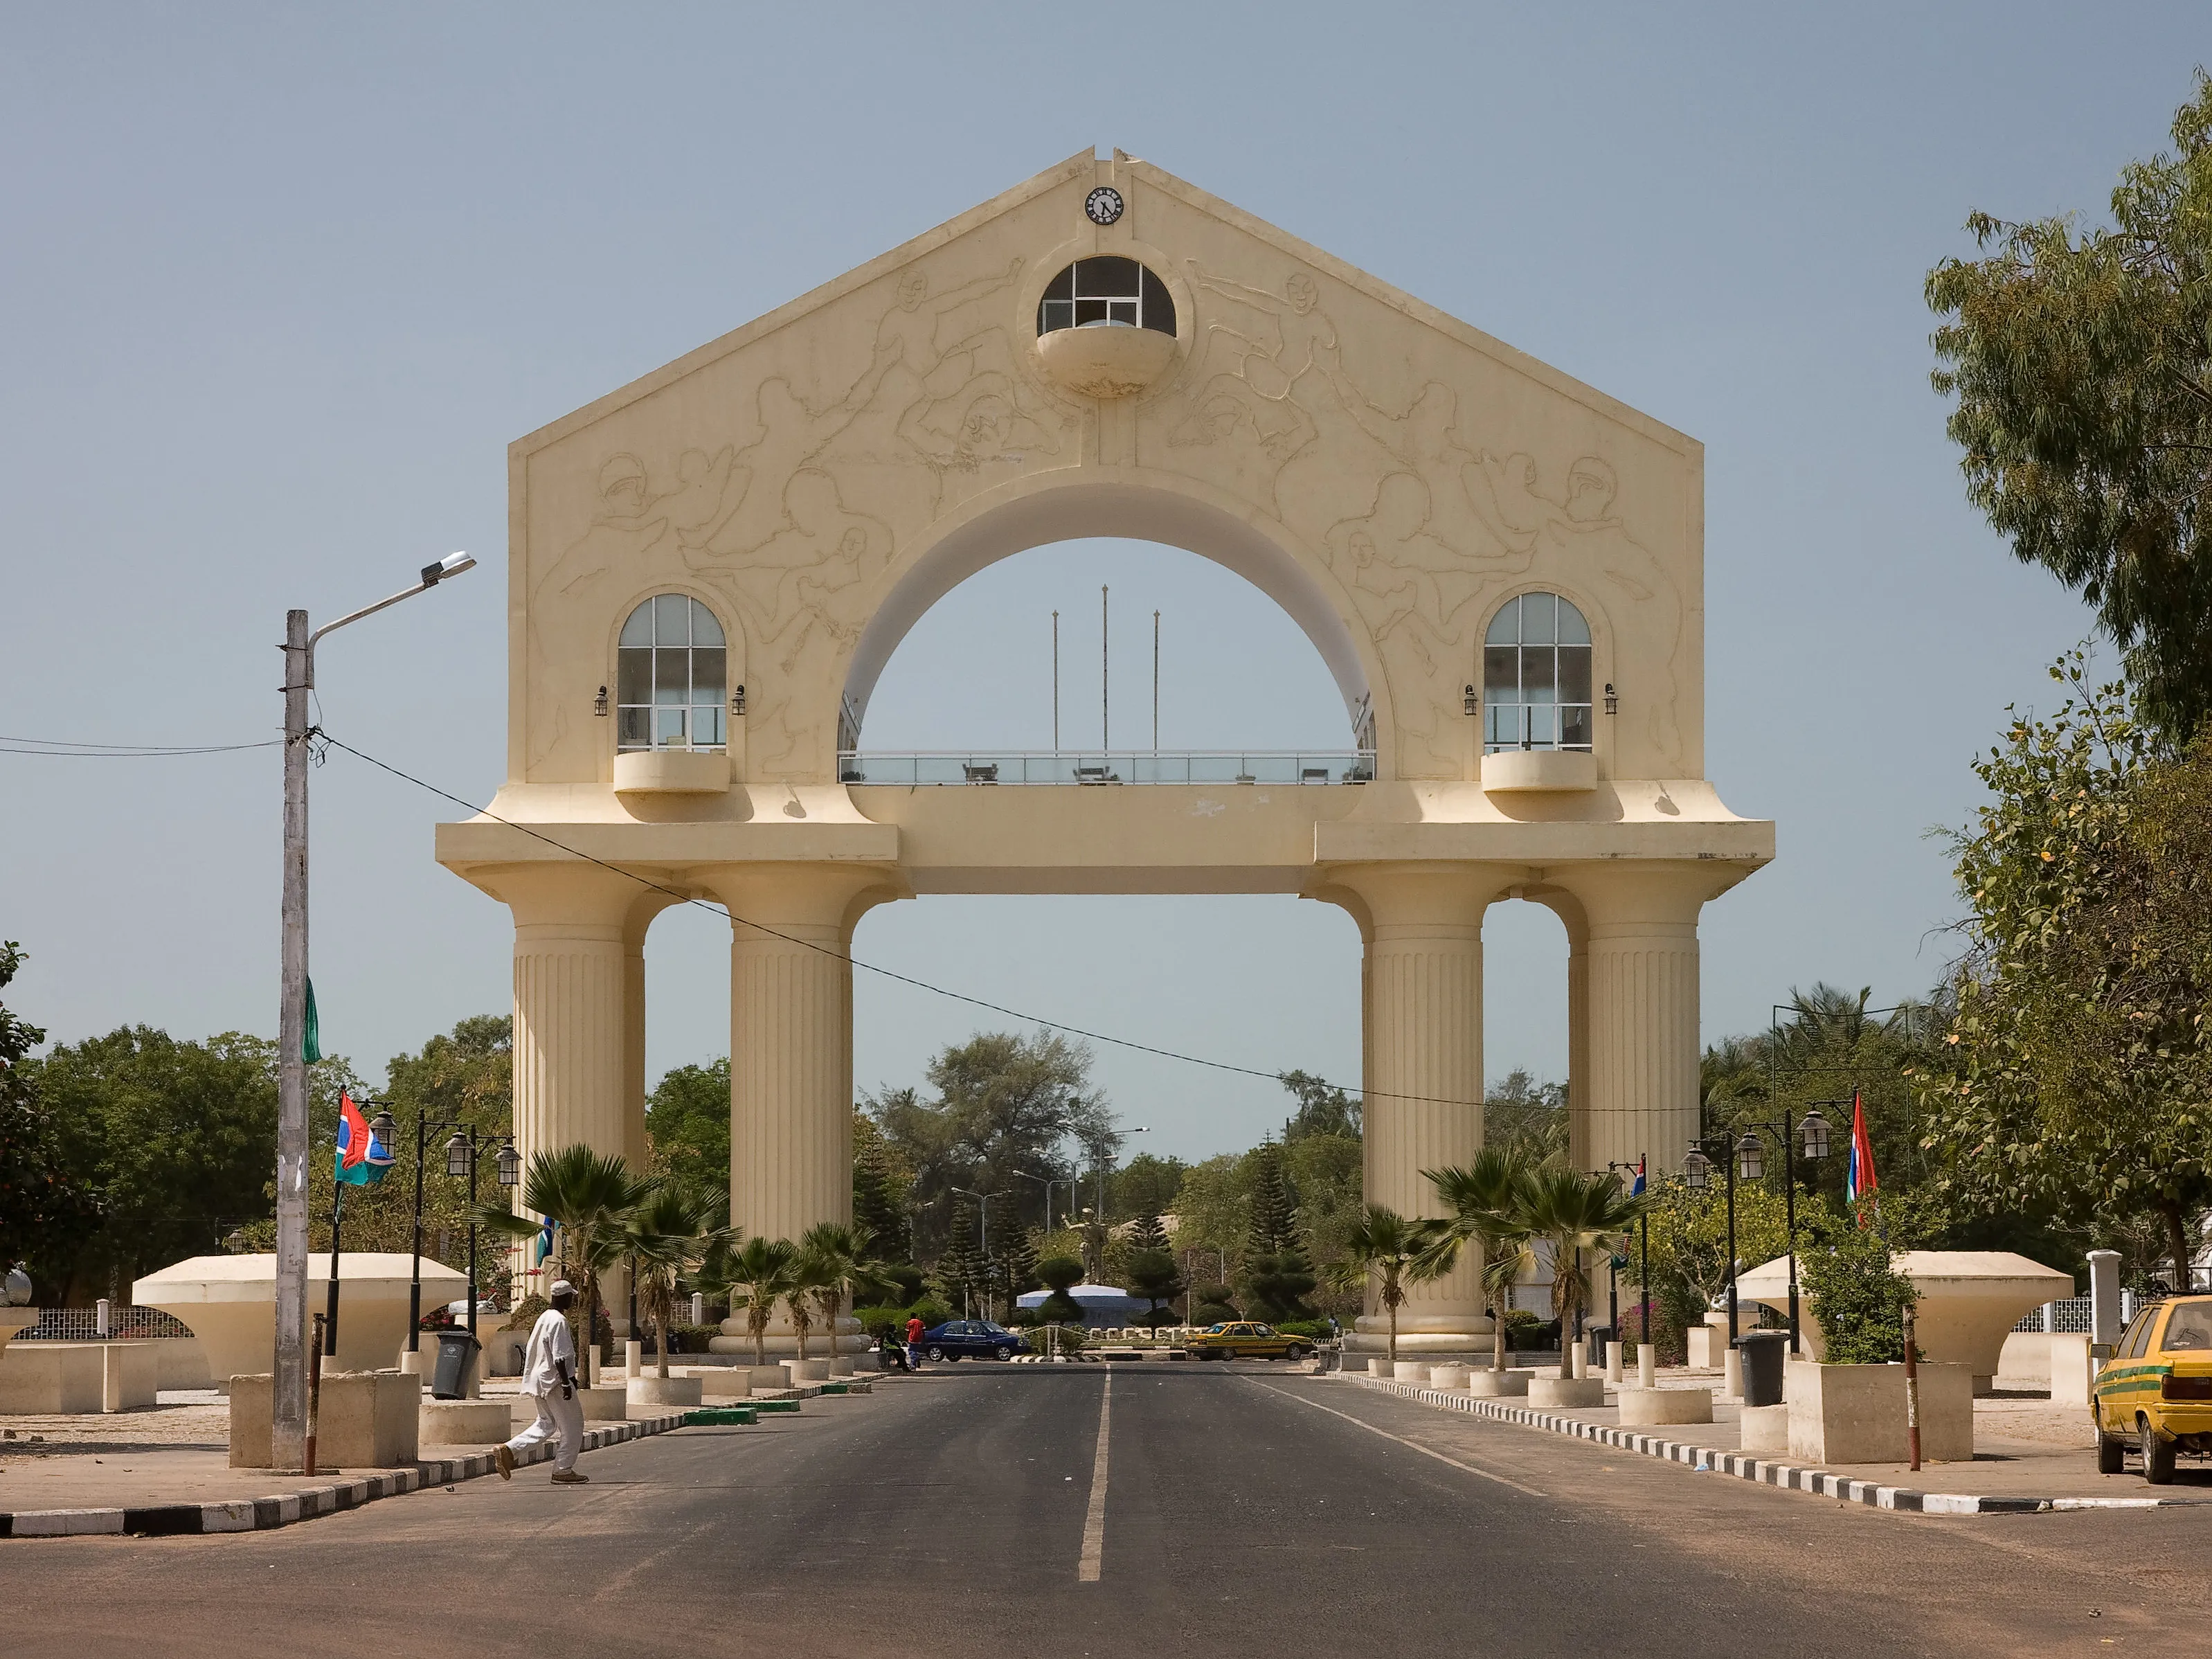 Arch 22 in Gambia, Africa | Architecture - Rated 0.7